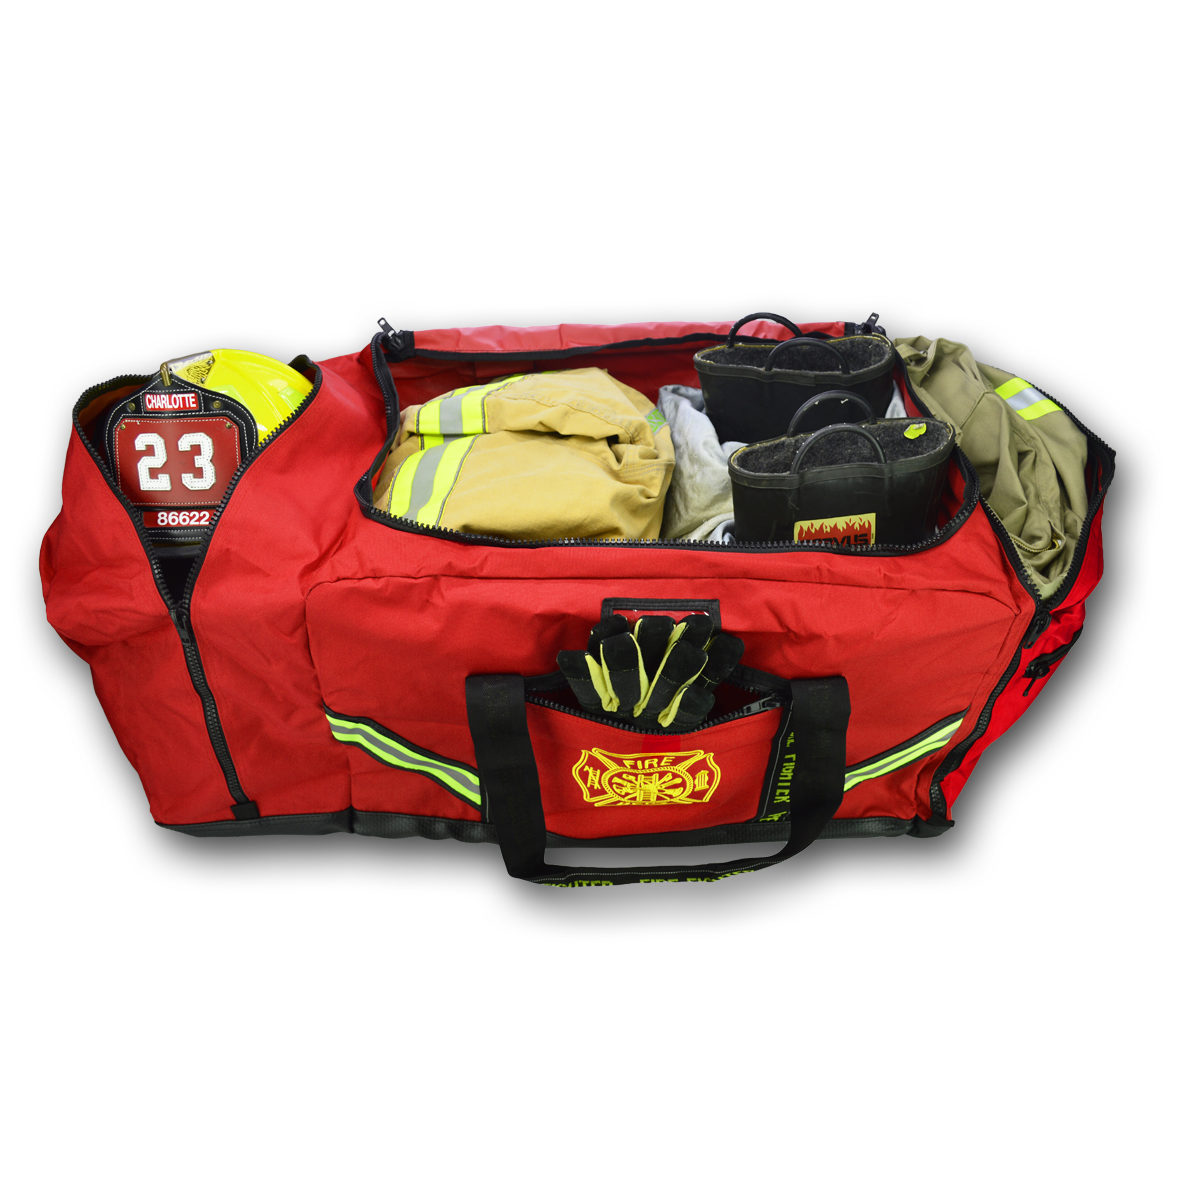 PERSONALIZED FIRST RESPONDER  Fireman XL Step-In Turnout Fire Gear Bag  BLACK